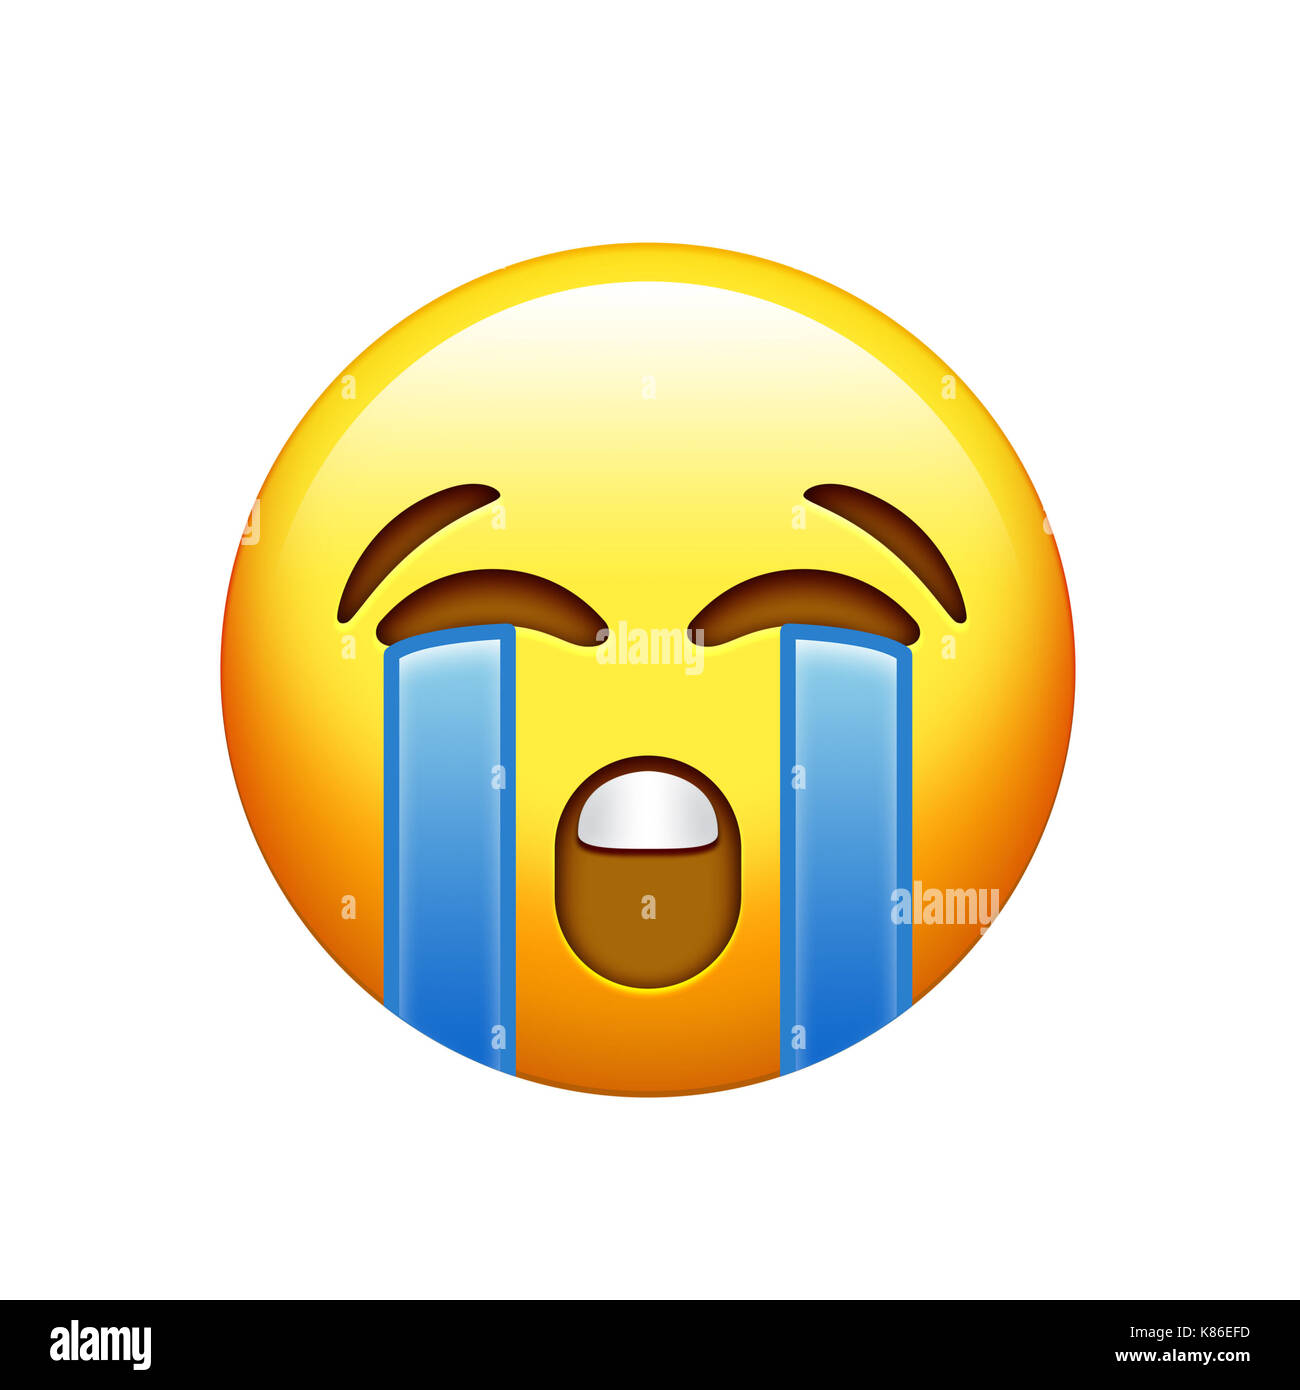 The yellow unhappy face with crying tear icon Stock Photo